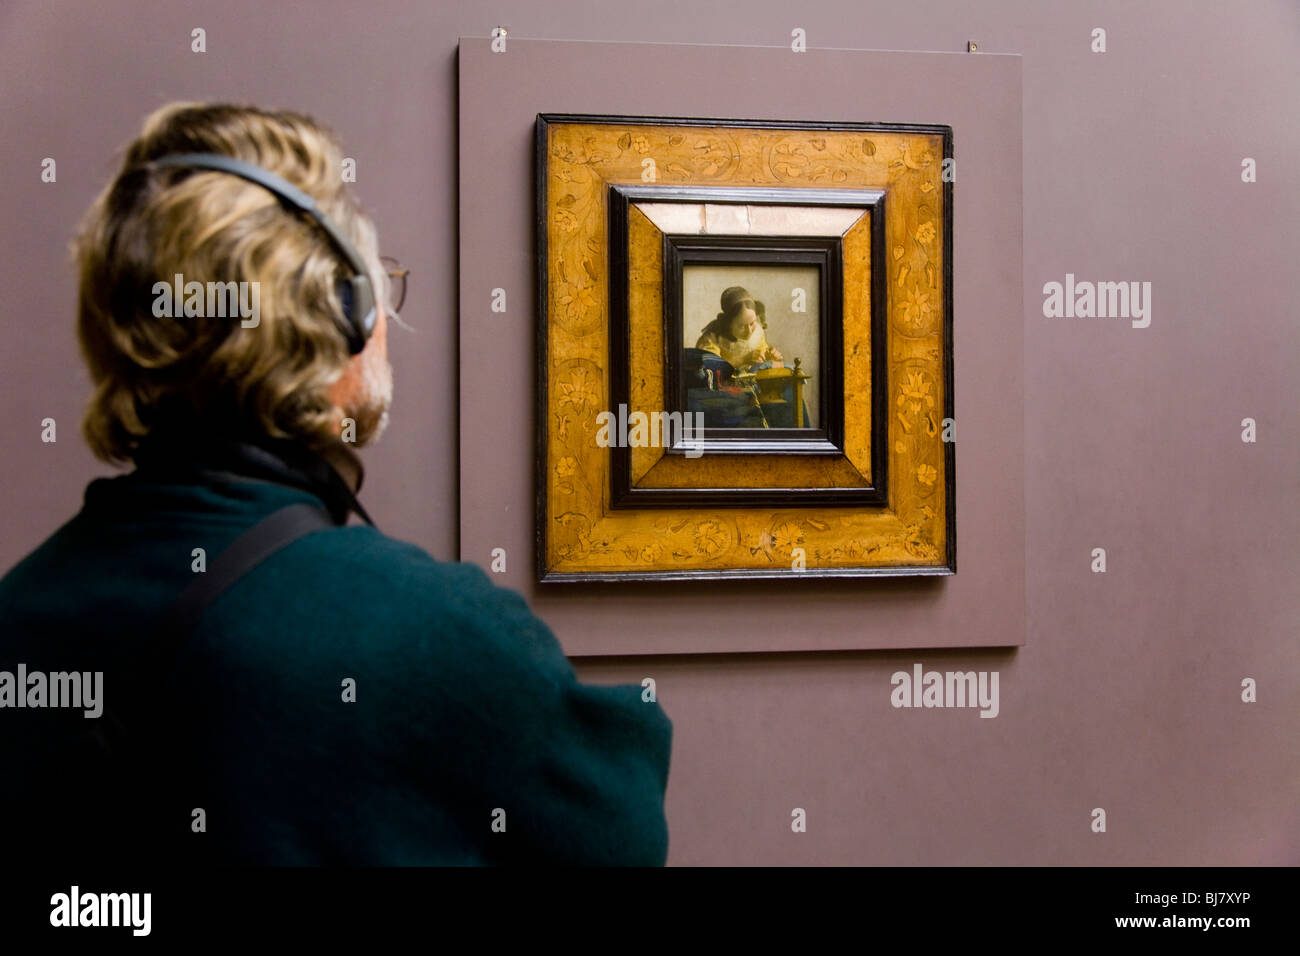 Male tourist wearing headphones / headphone guide looking at The Lacemaker painting by Vermeer. The Louvre Museum, Paris. France Stock Photo